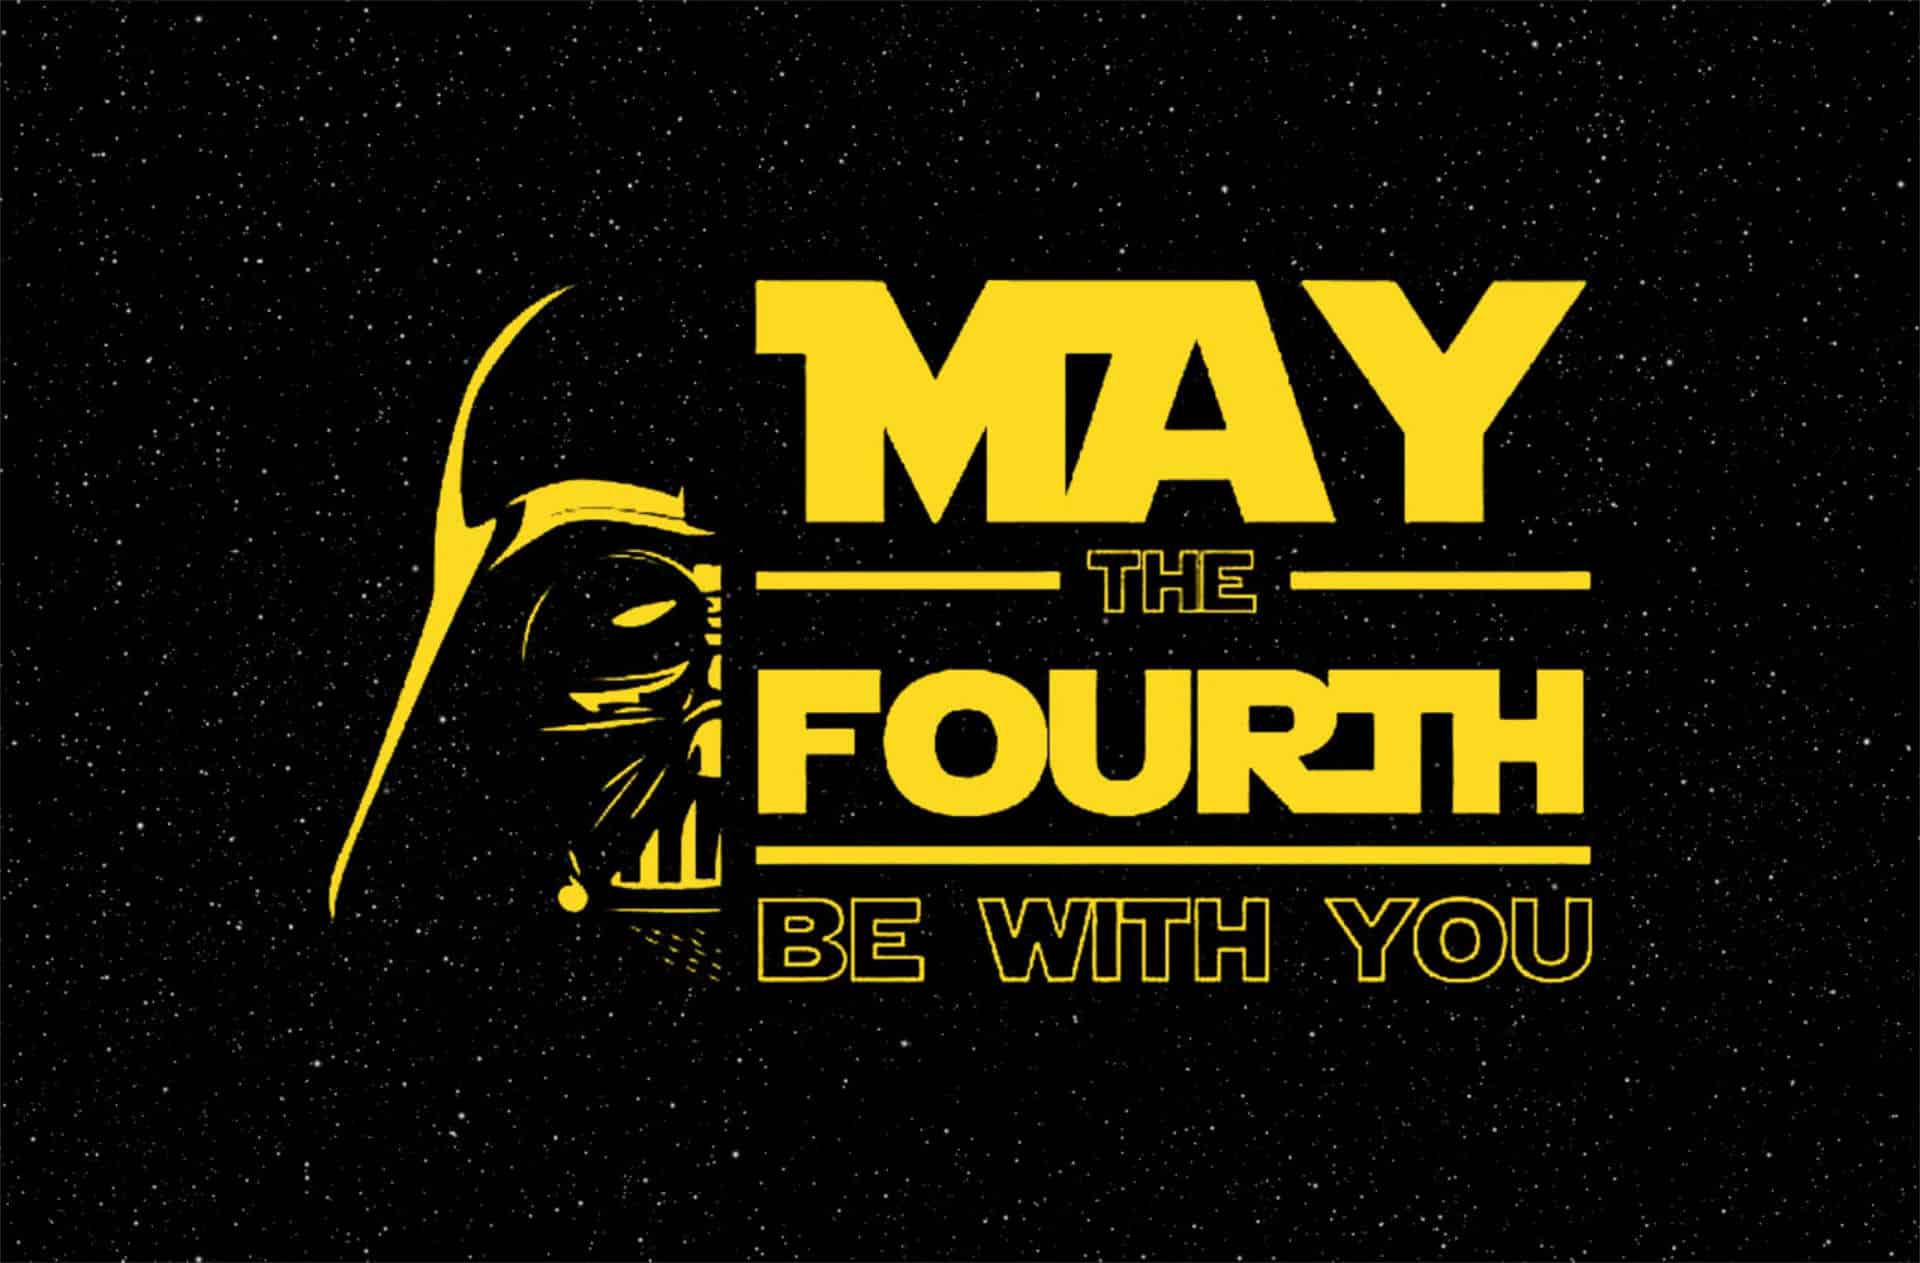 May the 4th Star Wars Day